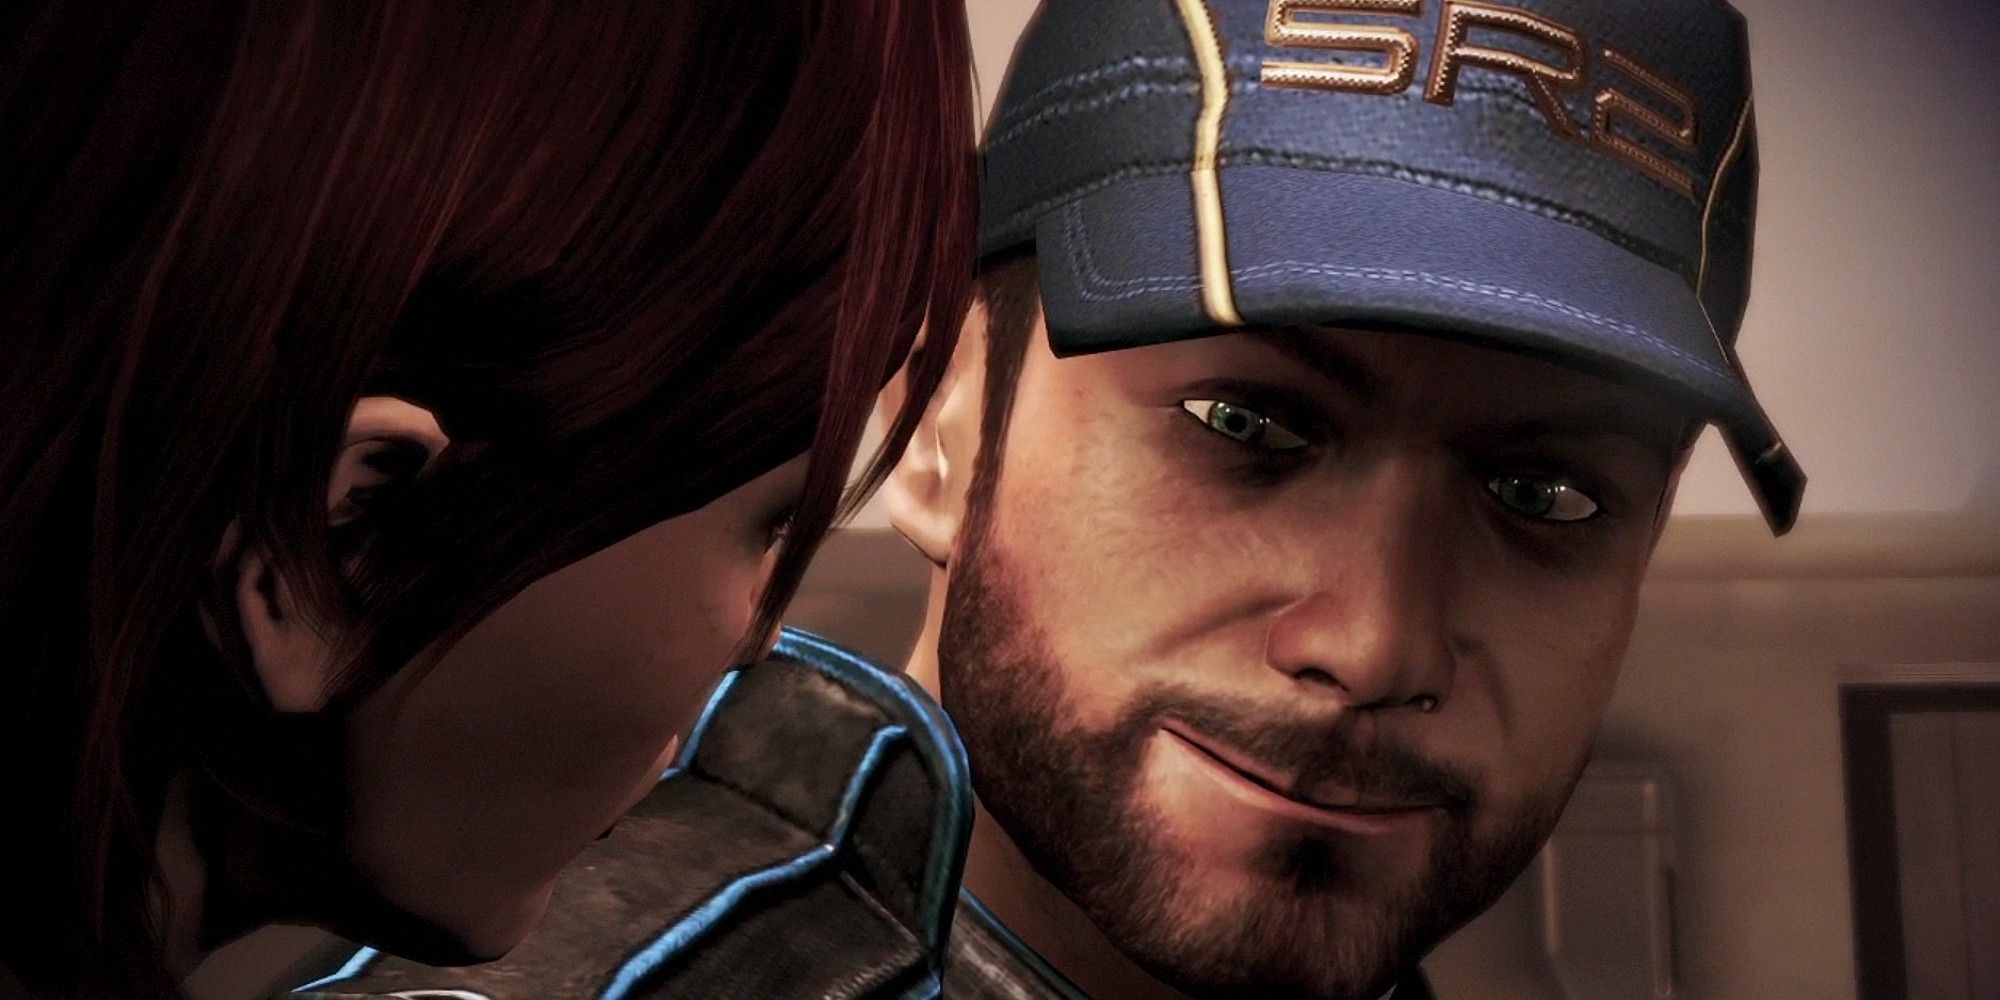 Mass Effect 3 Mod Adds Joker Romance With New Voiced Dialogue And Cutscenes